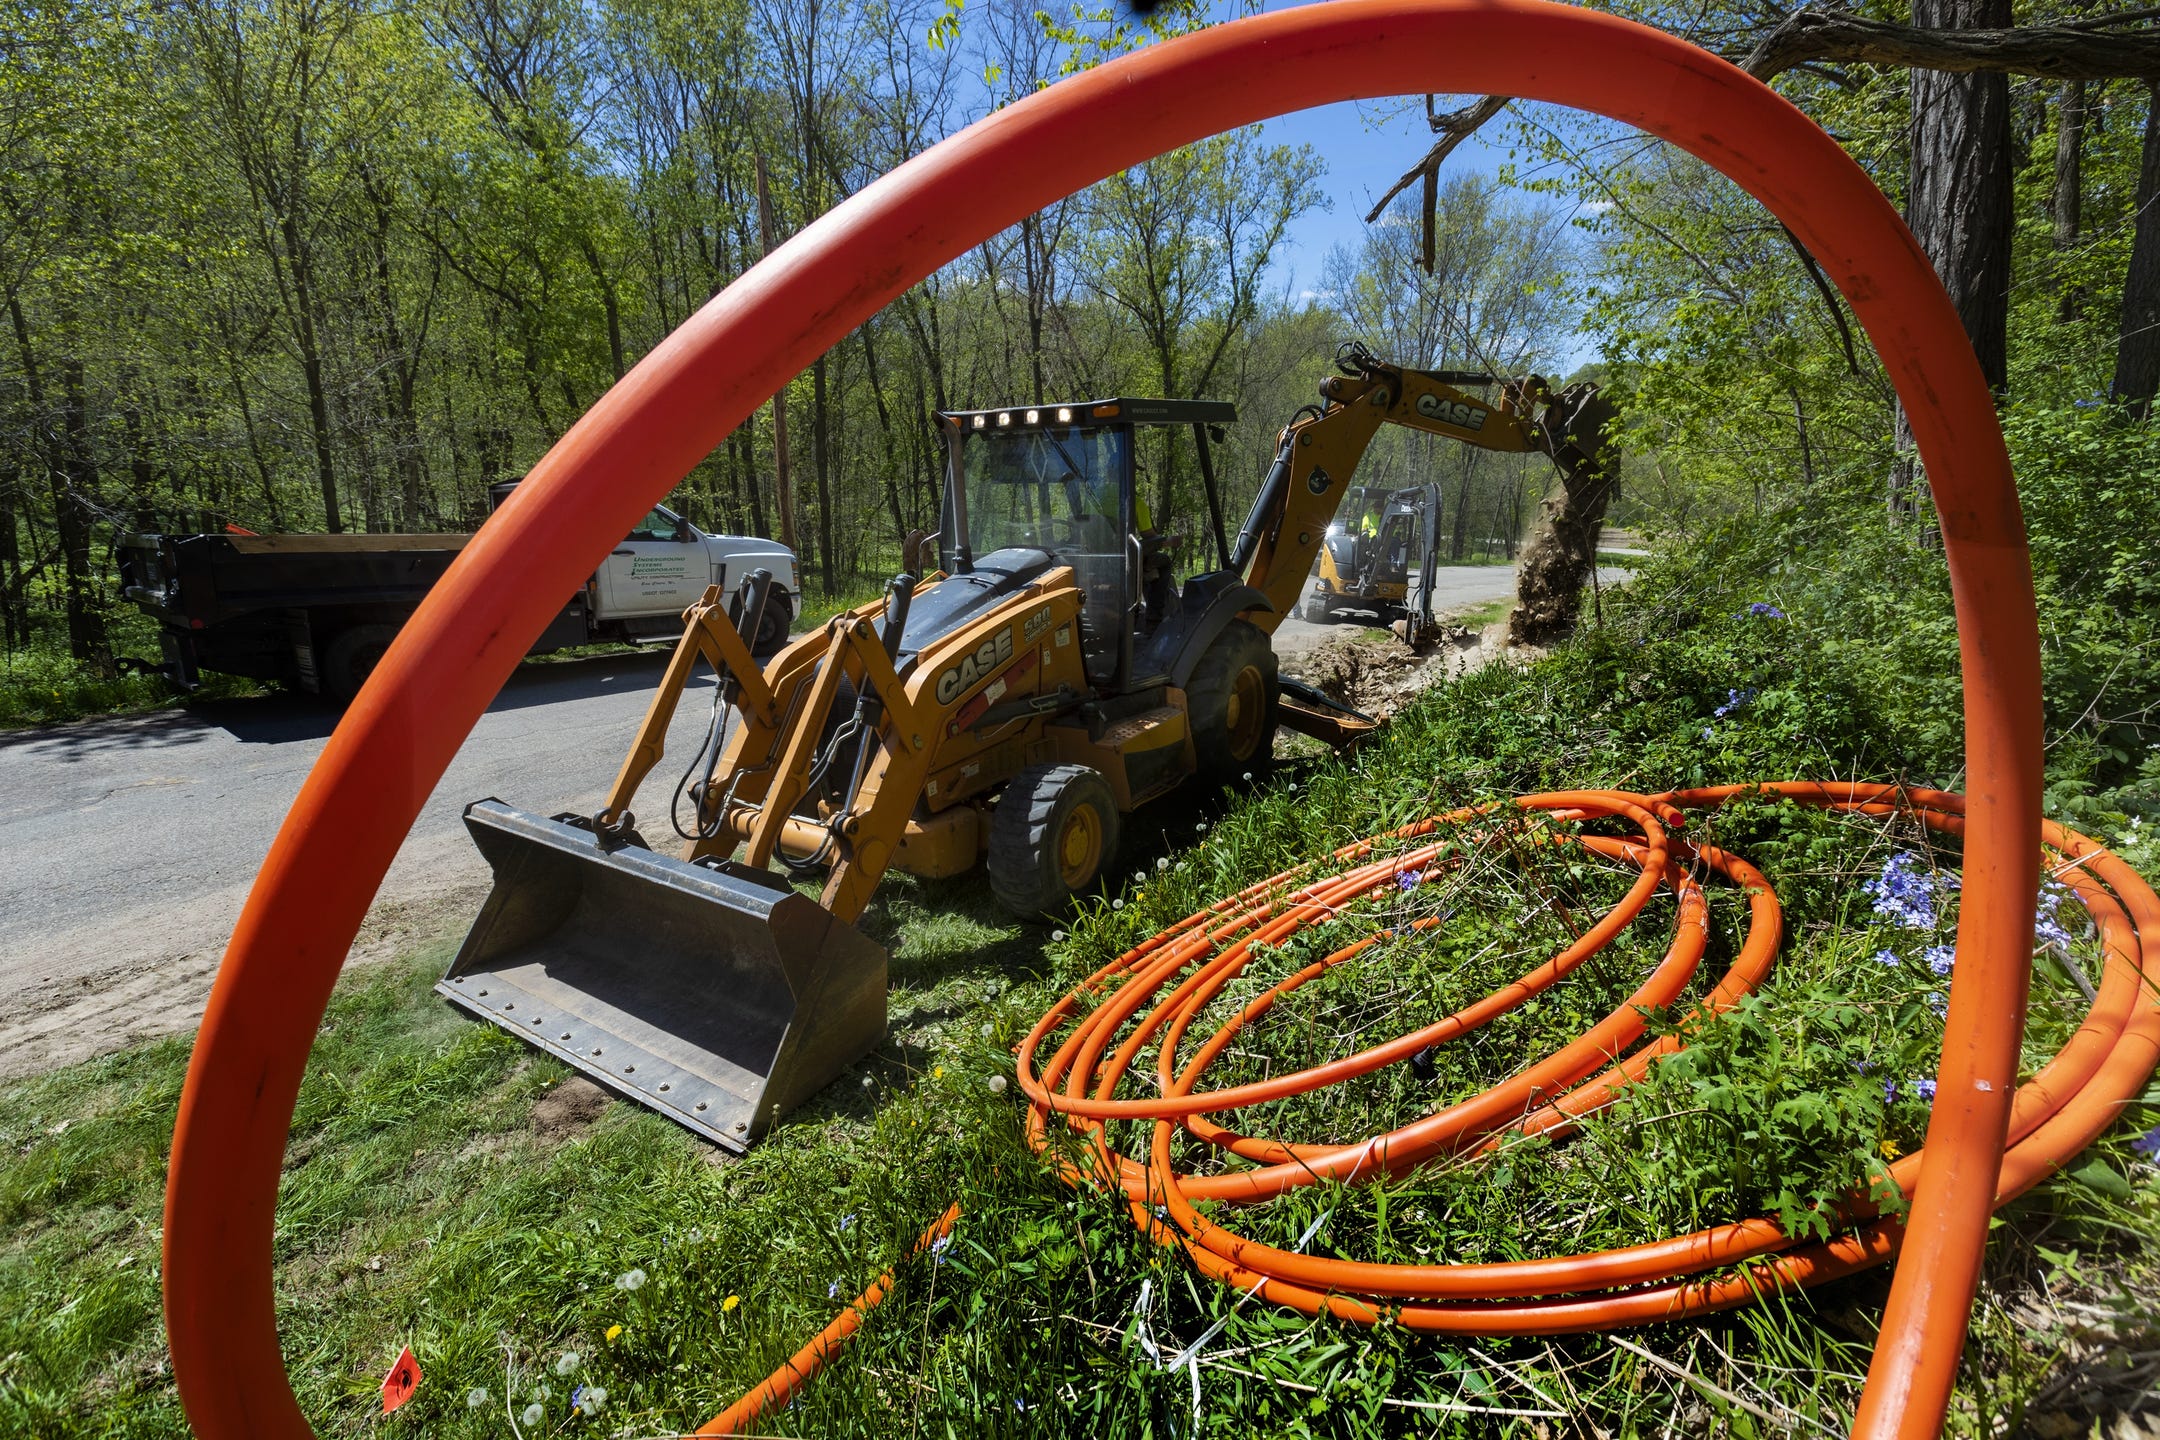 We've spent billions to provide broadband to rural areas. What failed?